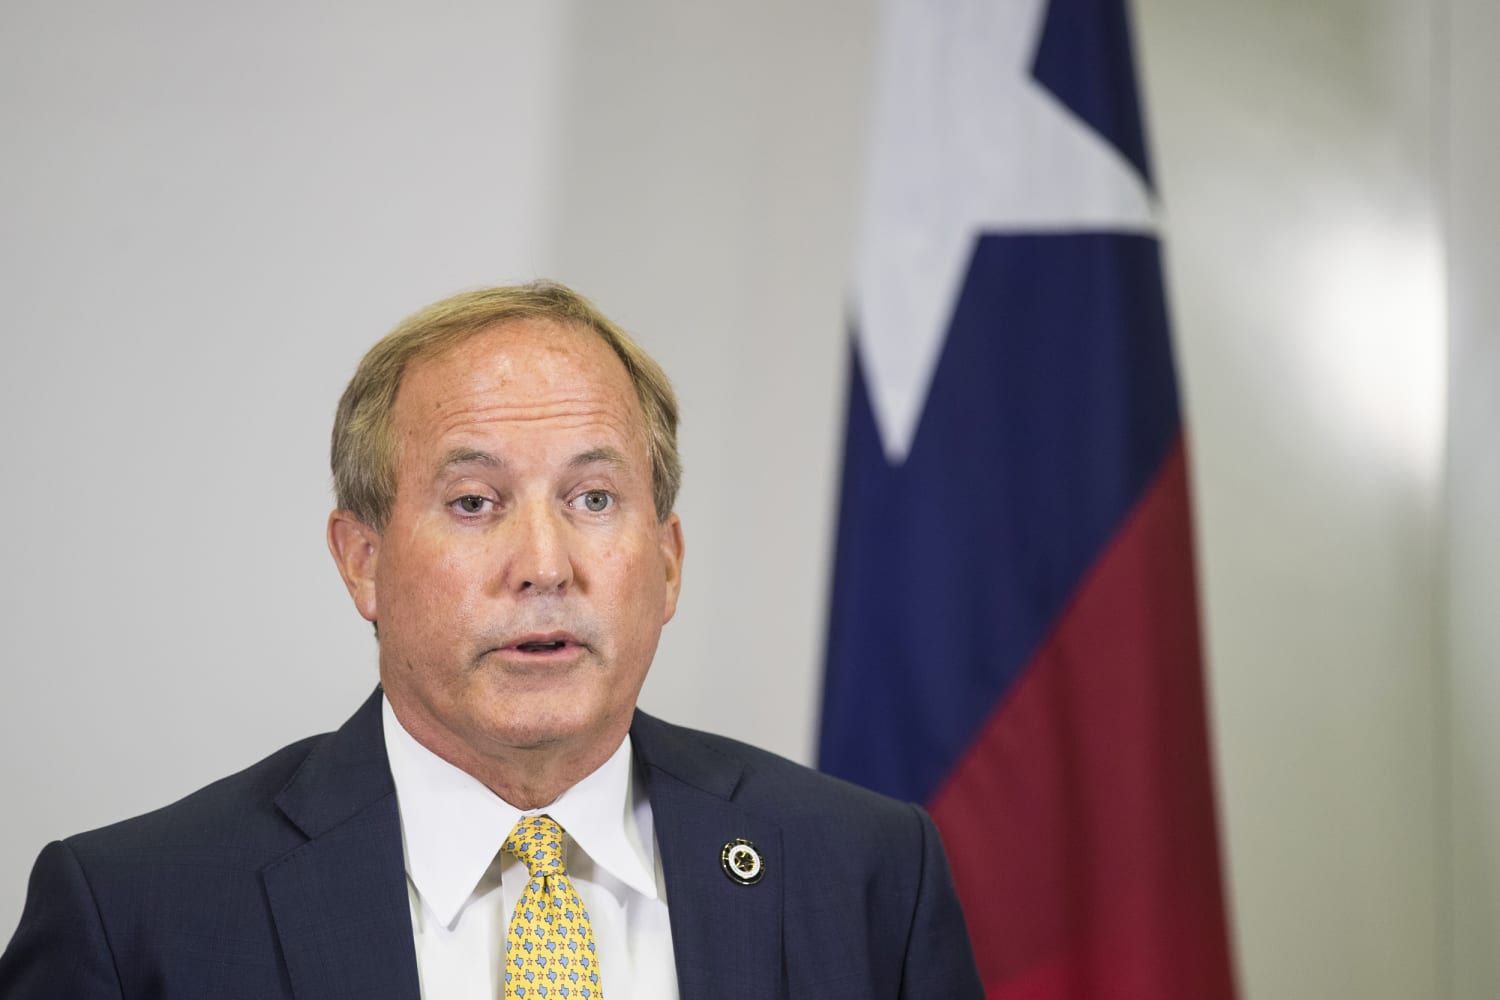 Impeachment trial of Texas AG Ken Paxton to start no later than August 28